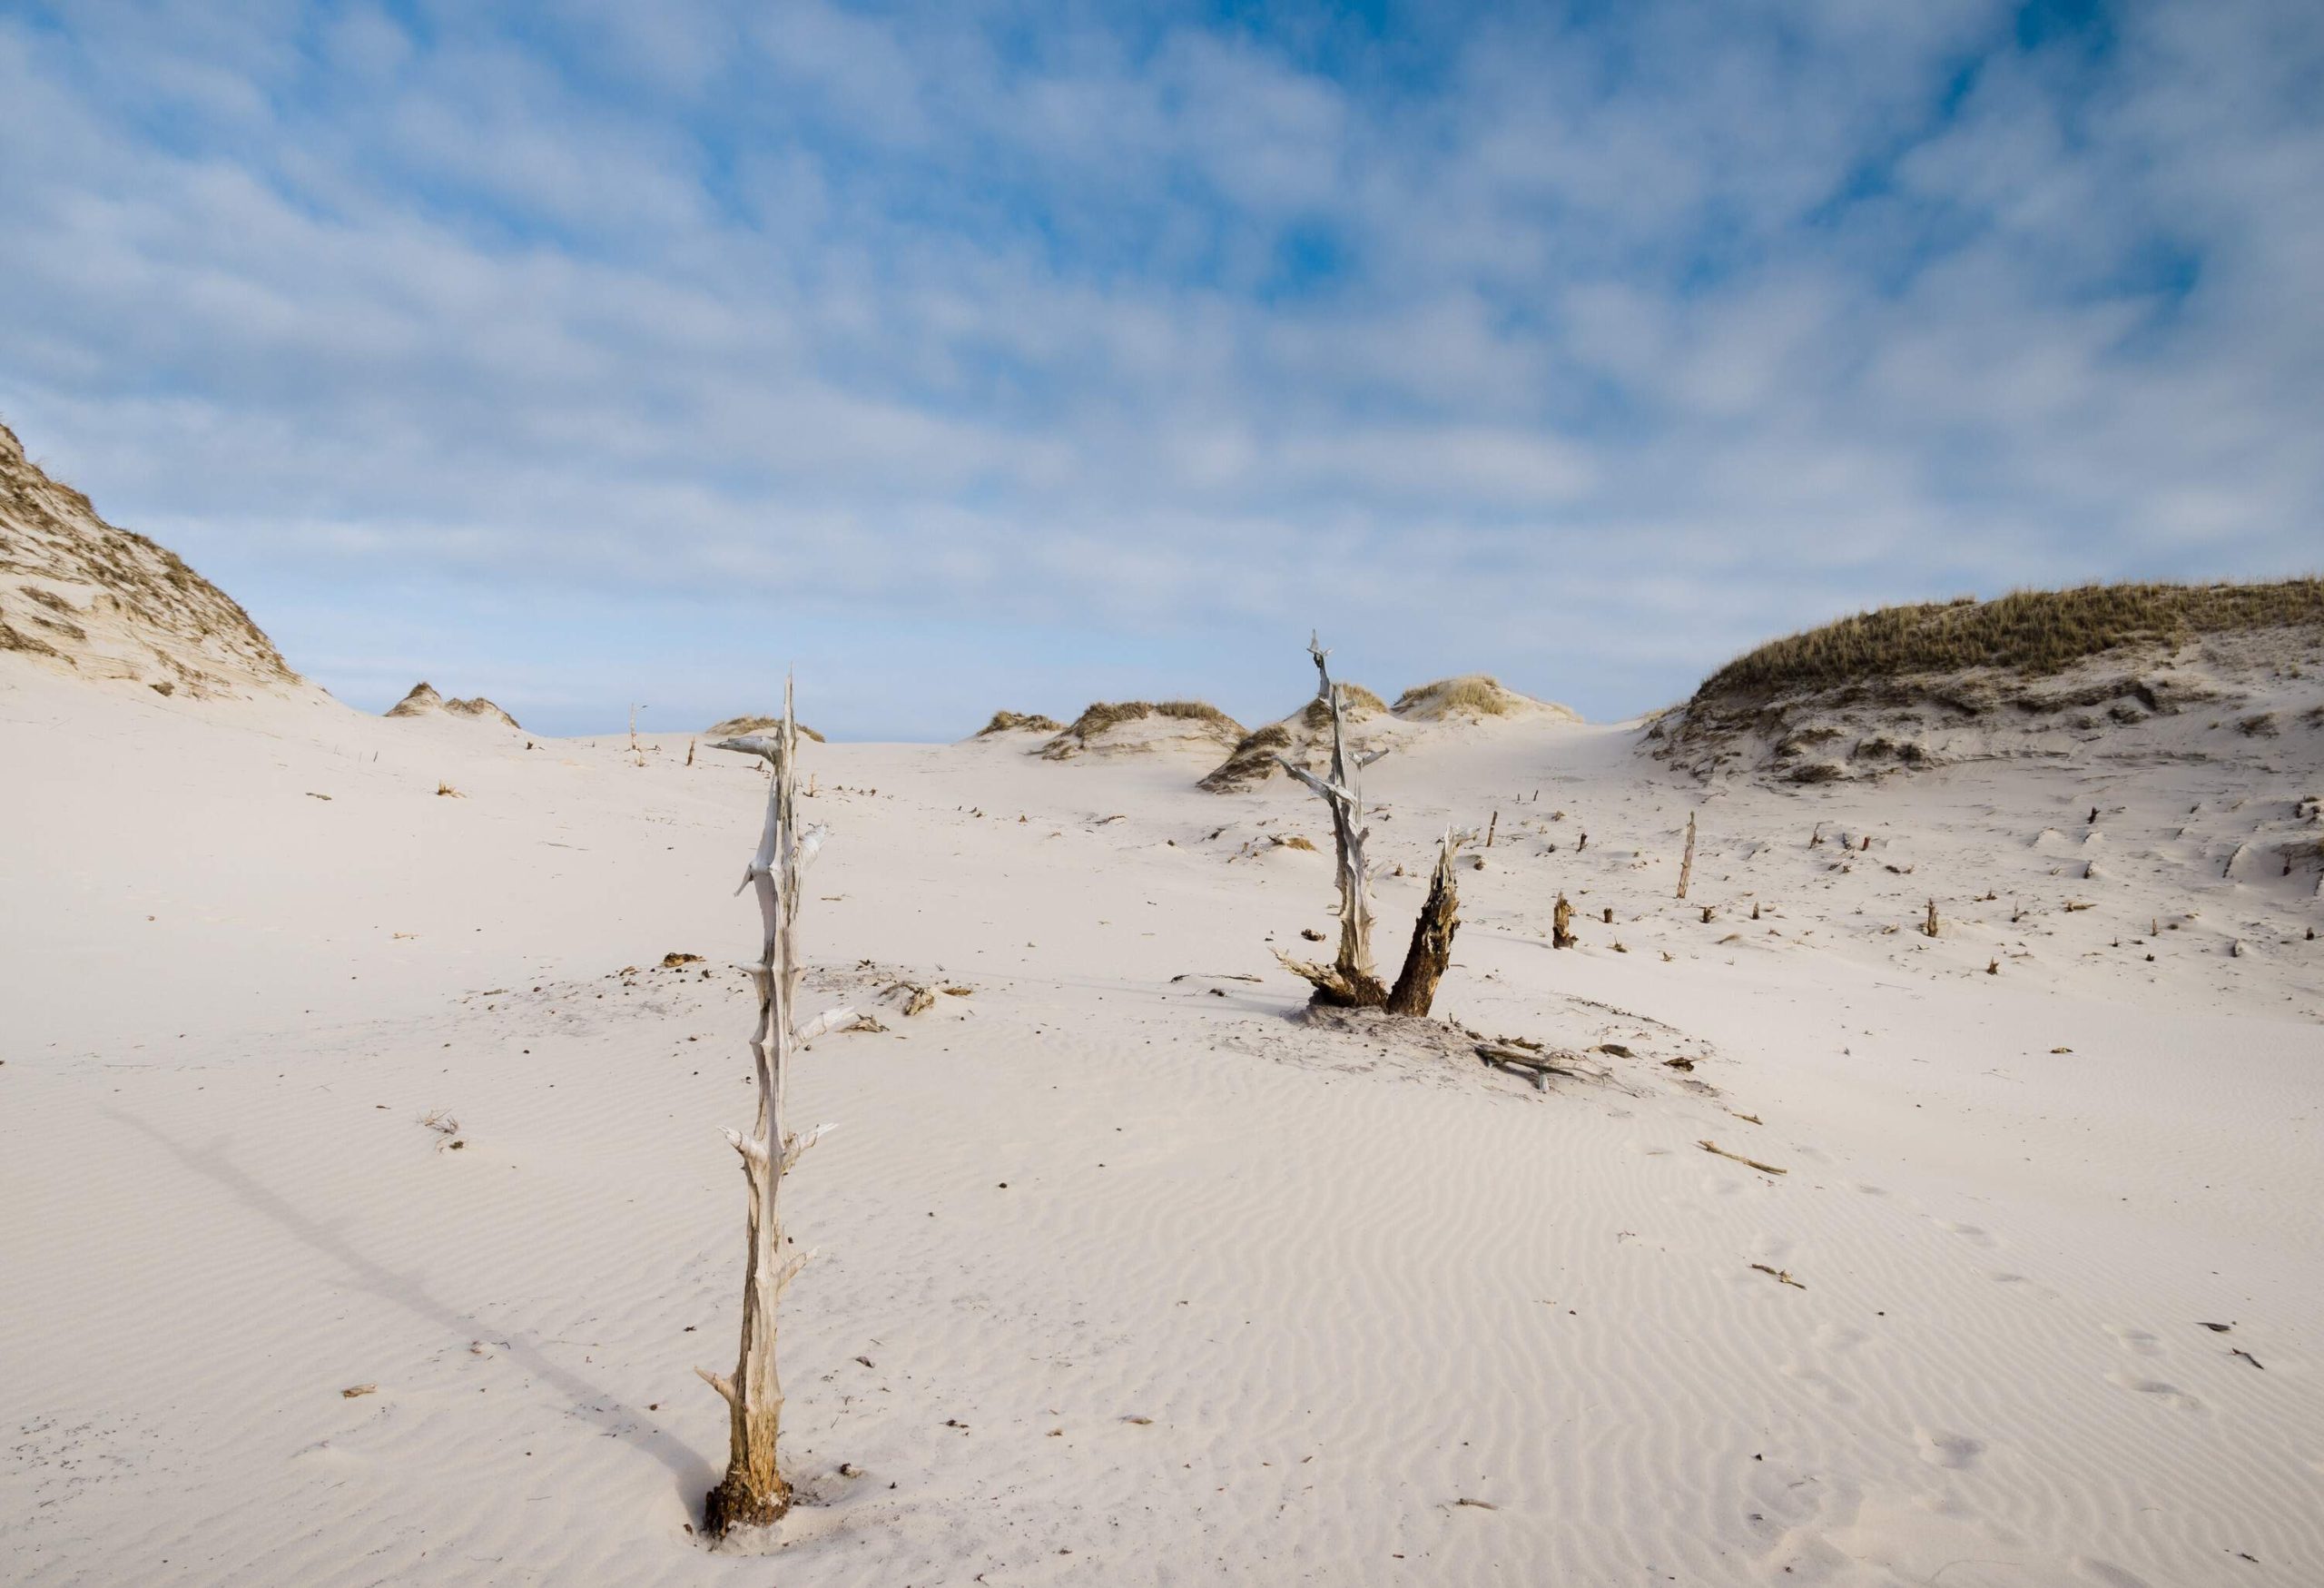 Twigs and leafless branches sticking out of white sand dunes.